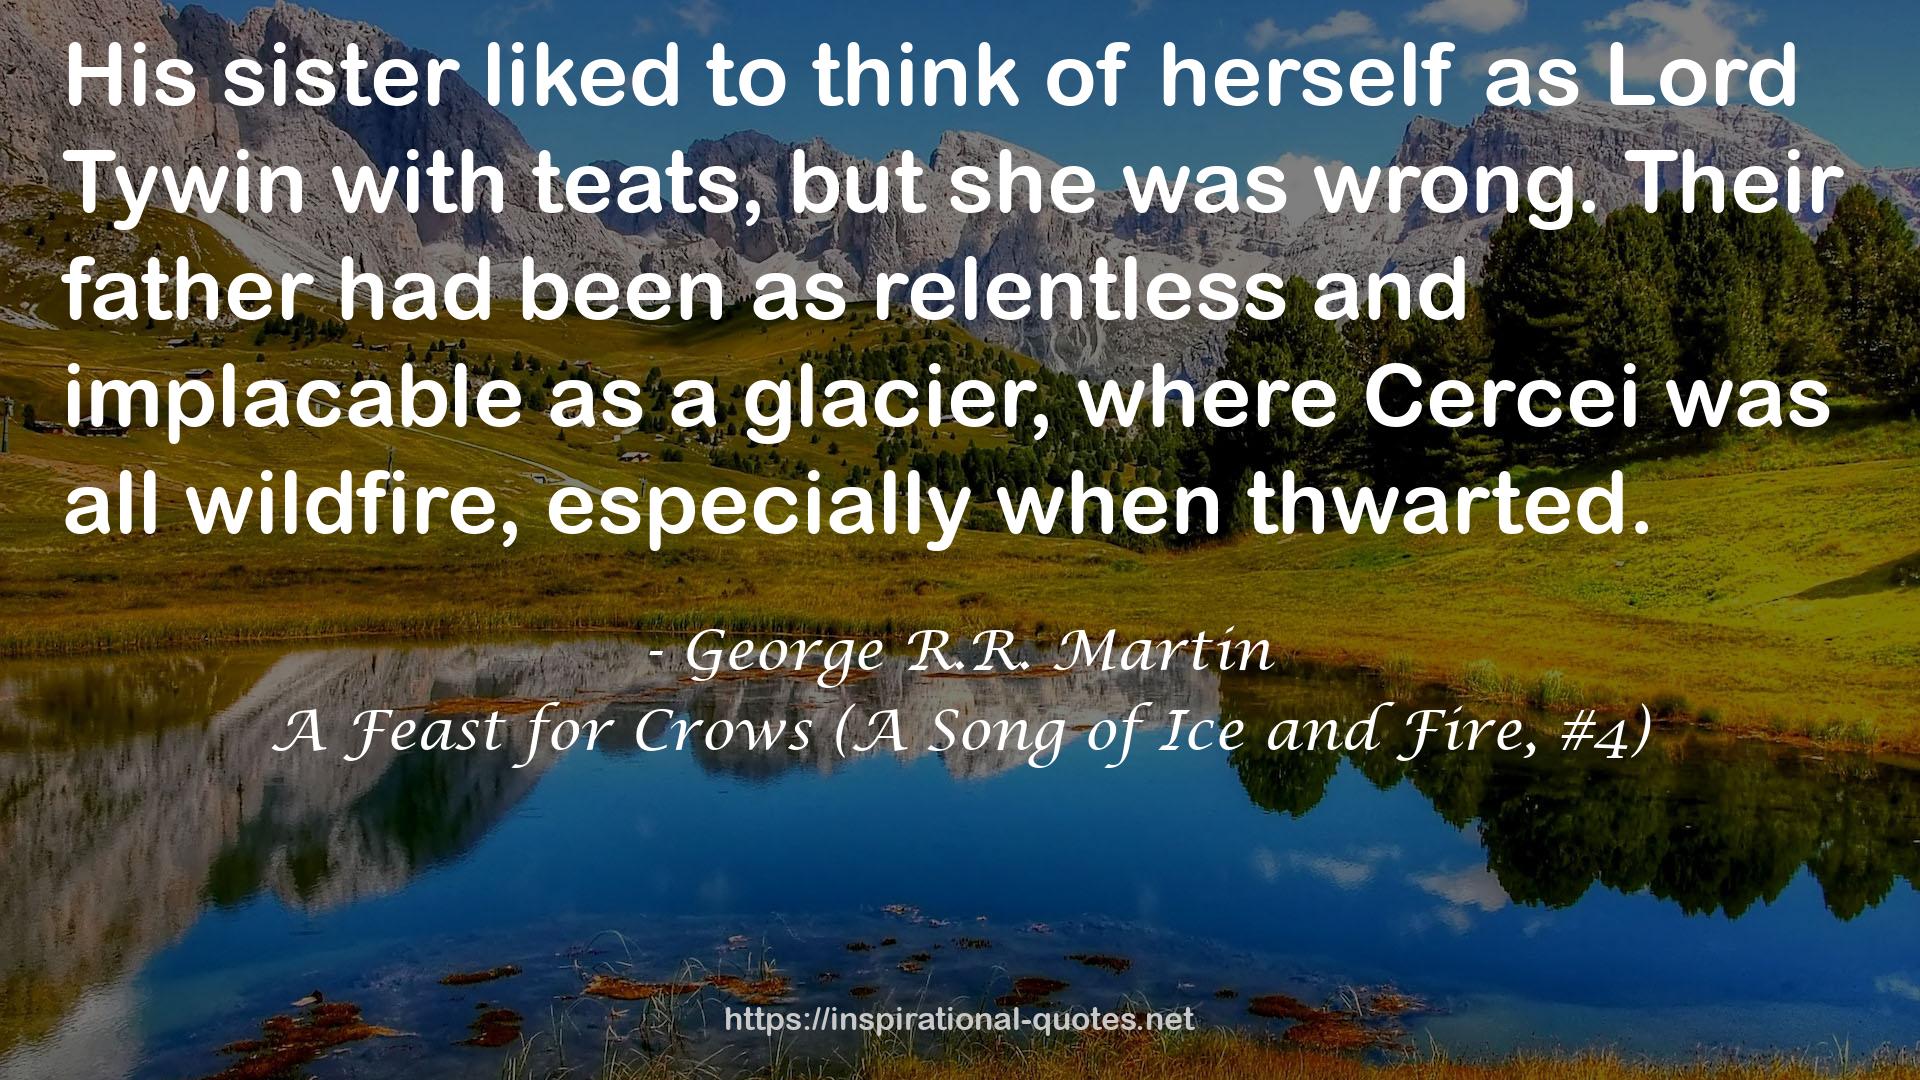 A Feast for Crows (A Song of Ice and Fire, #4) QUOTES